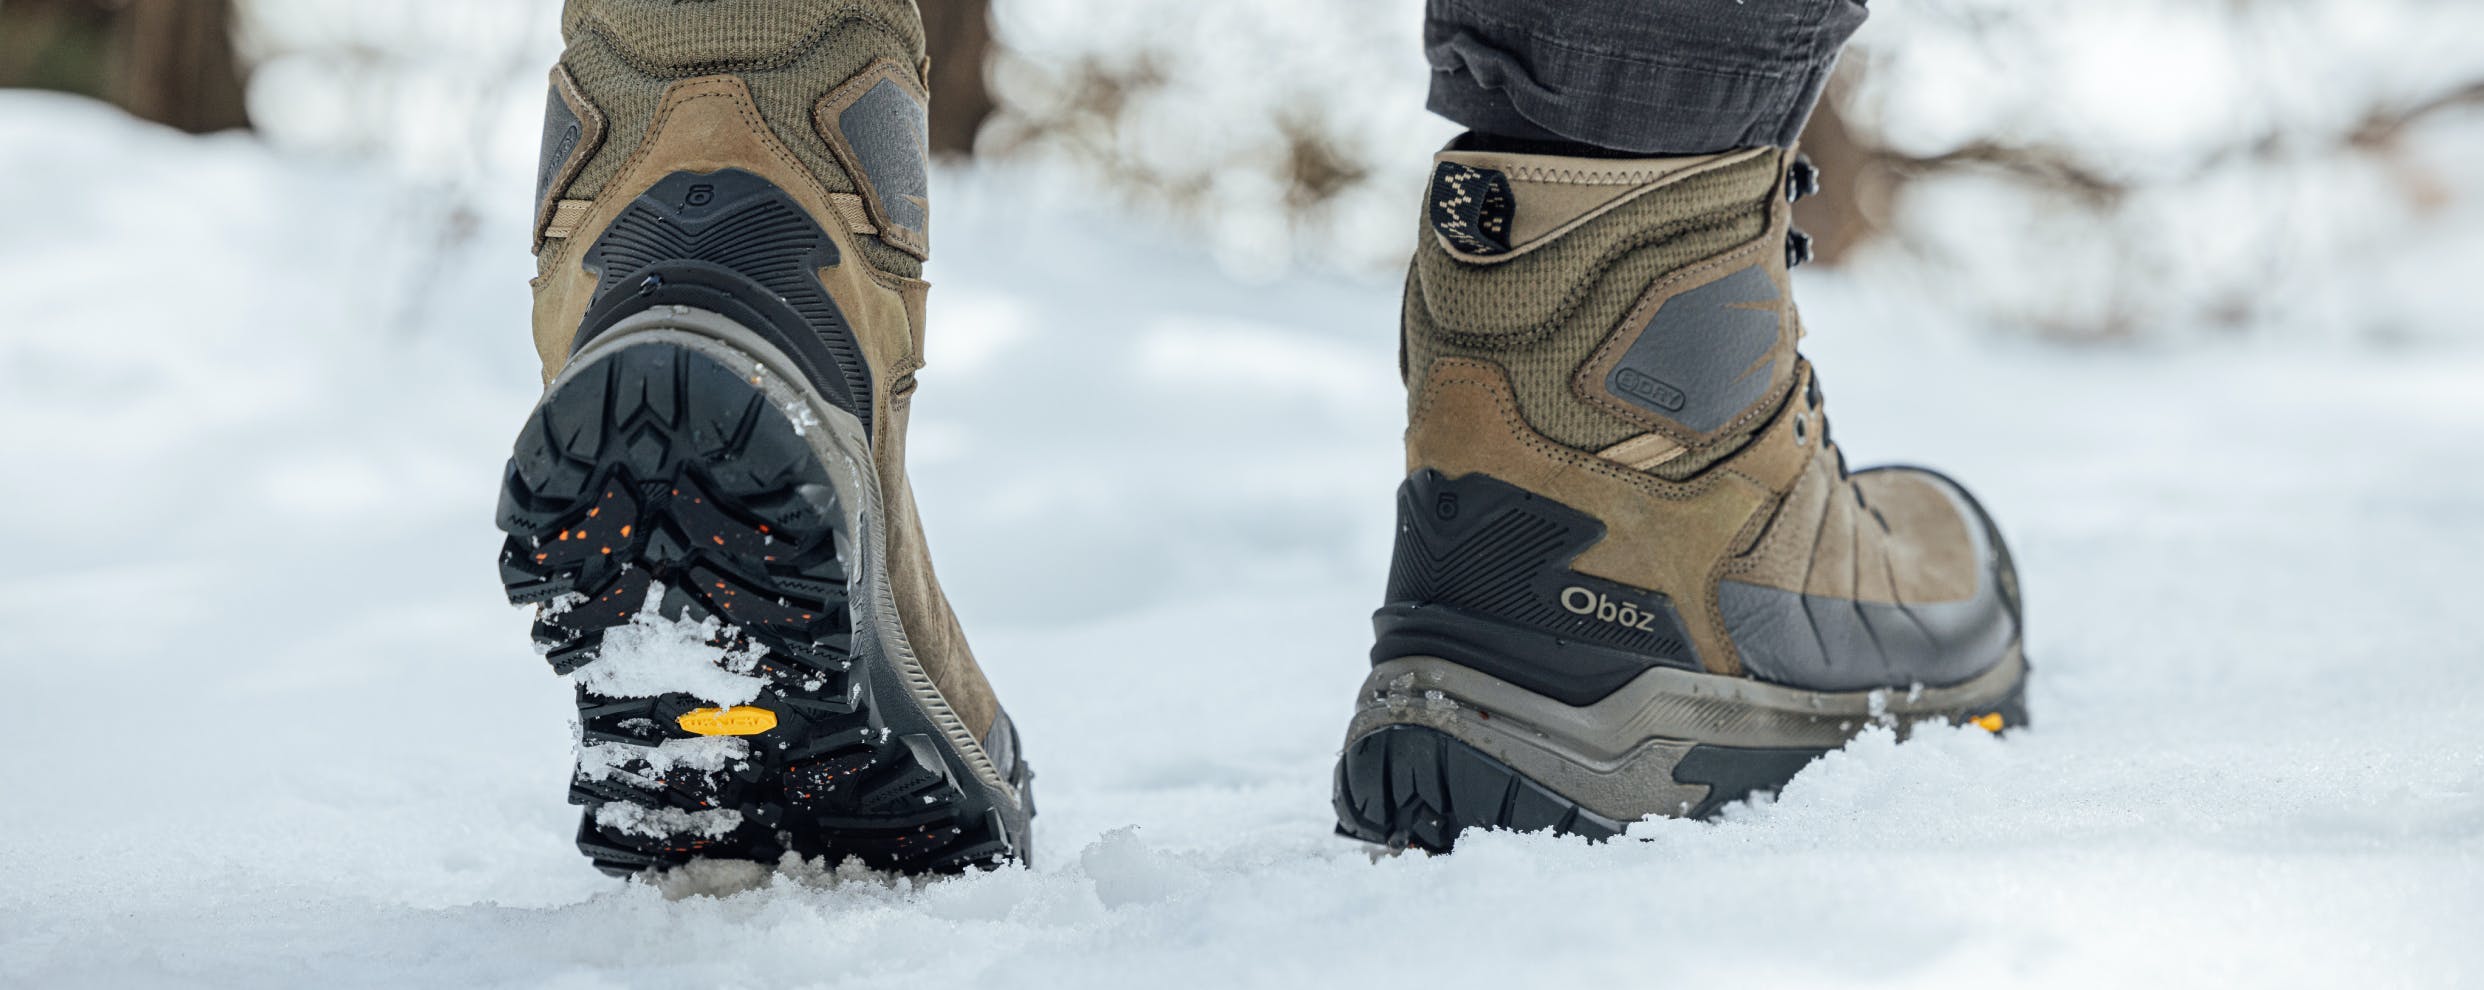 Waterproof, warm and made to last: find the right pair of boots for winter weather.